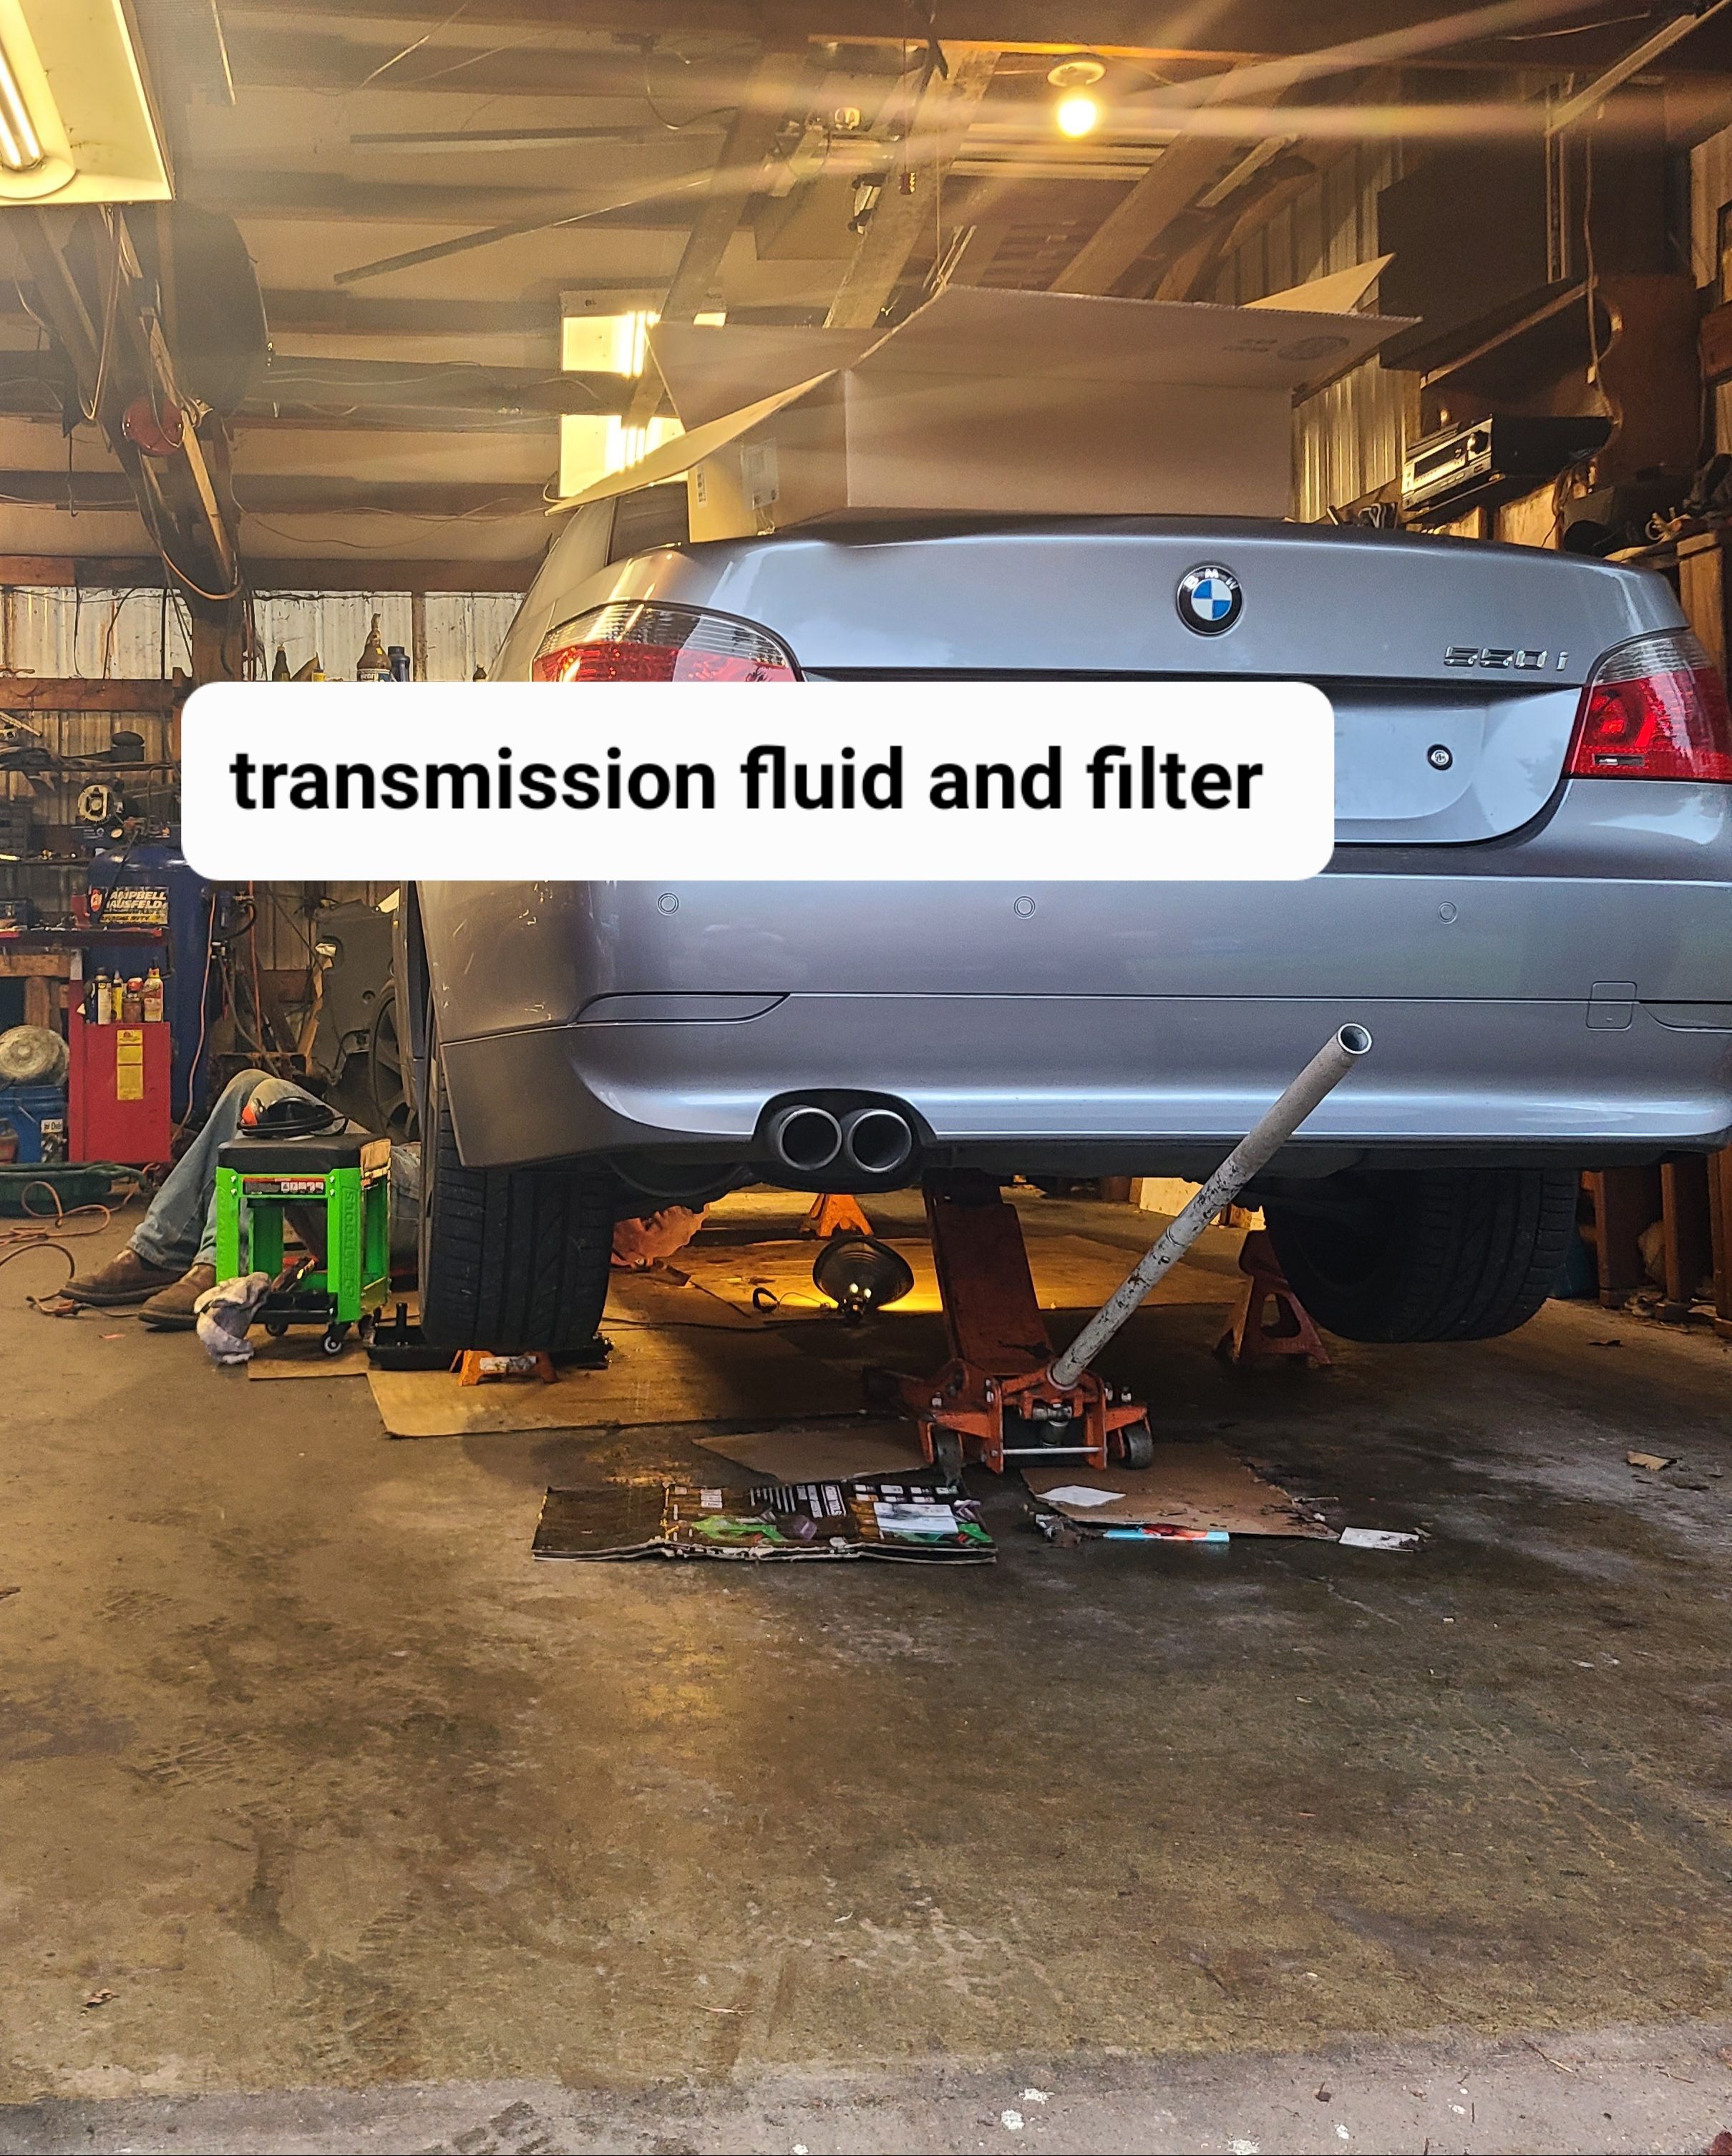 2007 BMW 550i transmission flush and filter replacement in a Bothell garage